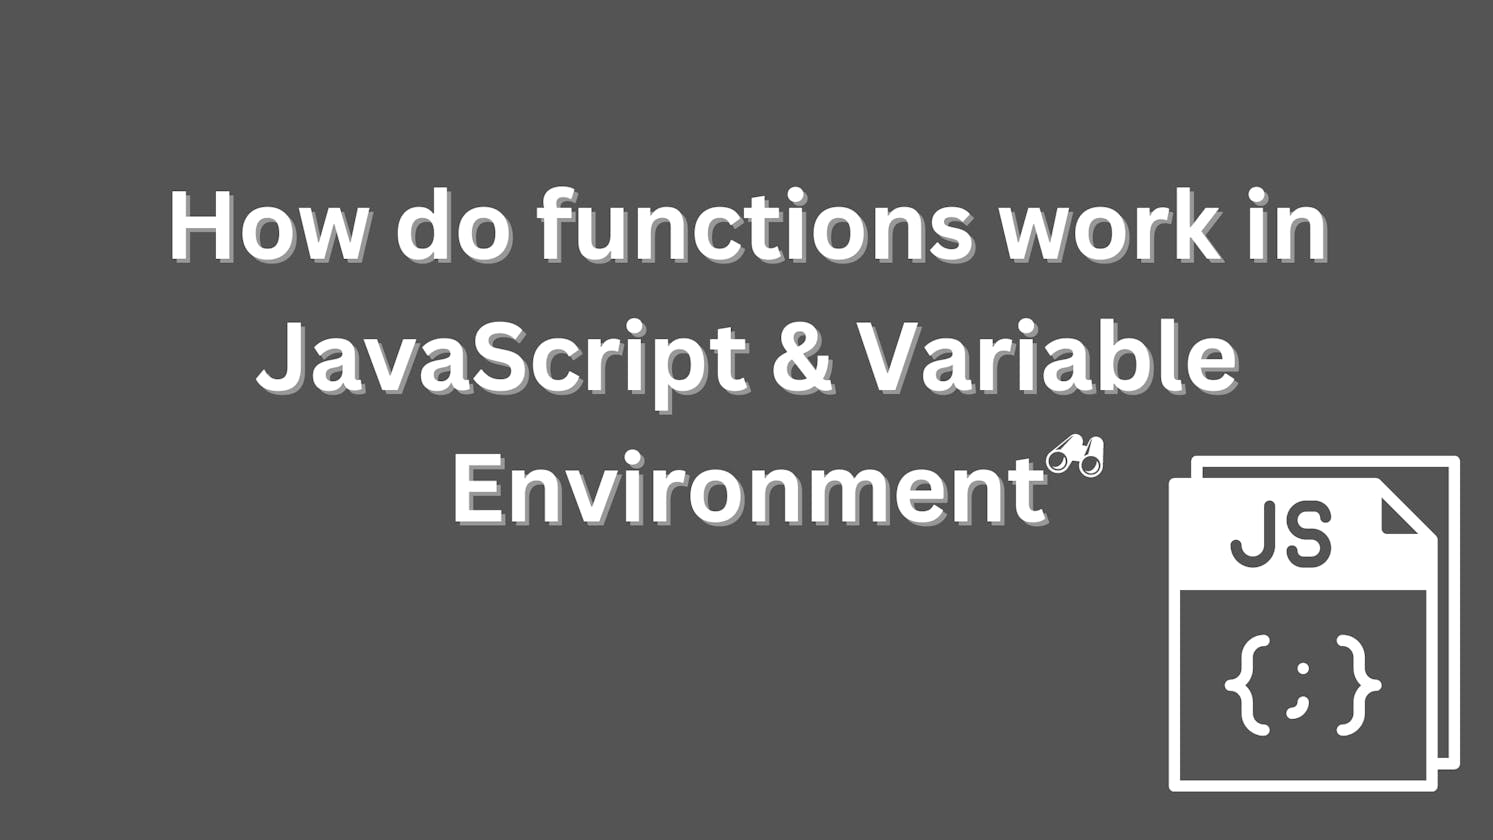 How do functions work in JavaScript & Variable Environment?